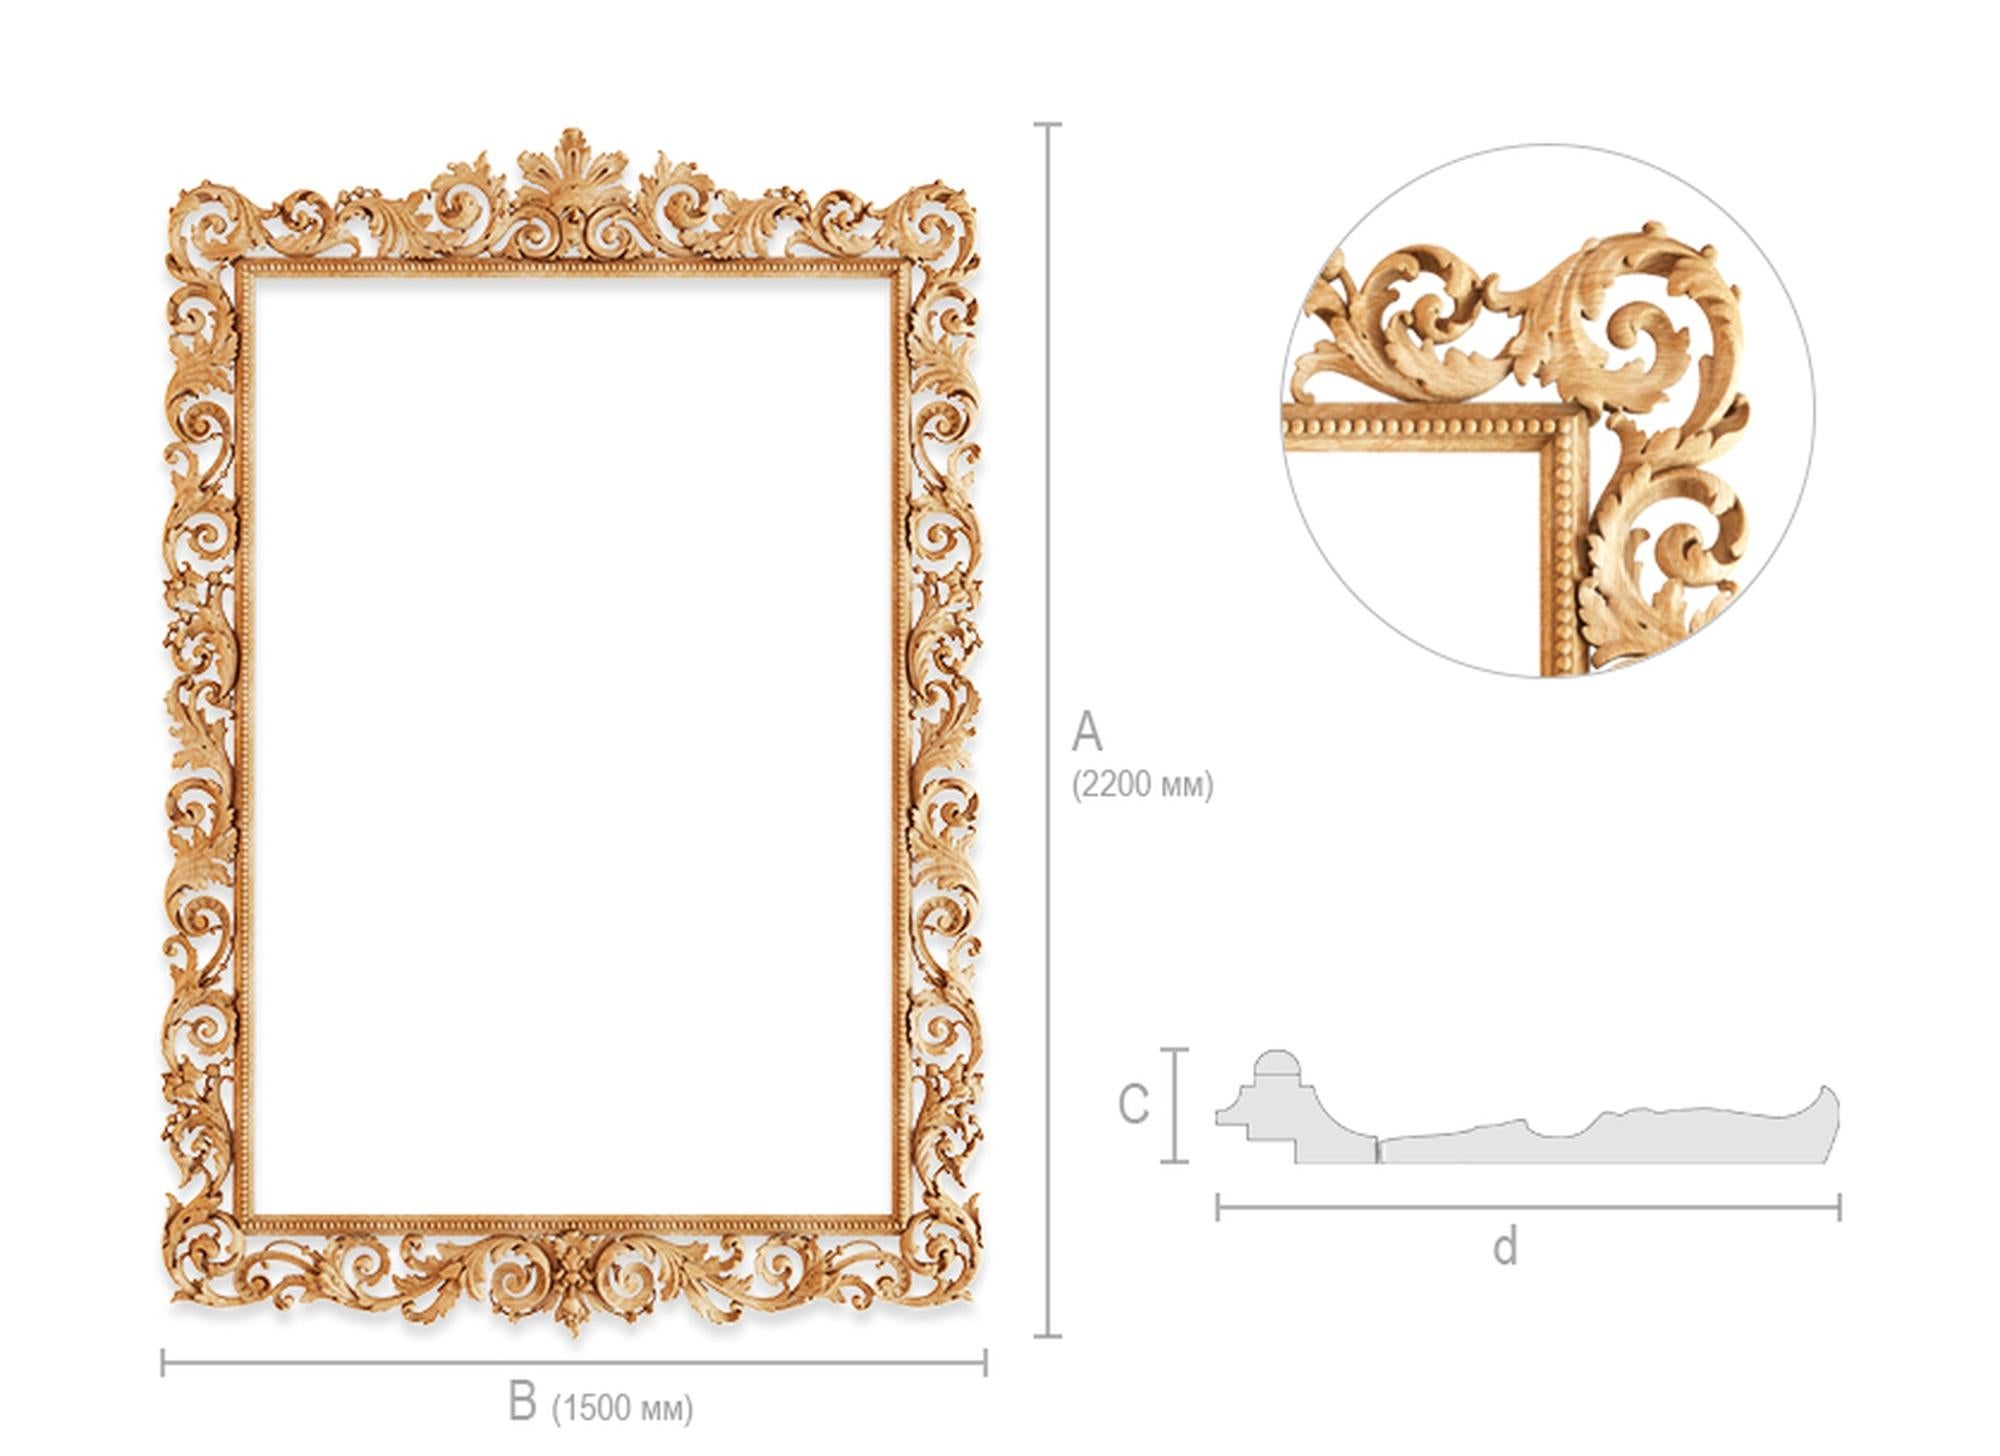 Unfinished High quality wood carving mirror frame from oak or beech of your choice. Unpainted.

>> SKU: RM-009

>> Dimensions (A x B x C x d x e):

1) 51.26